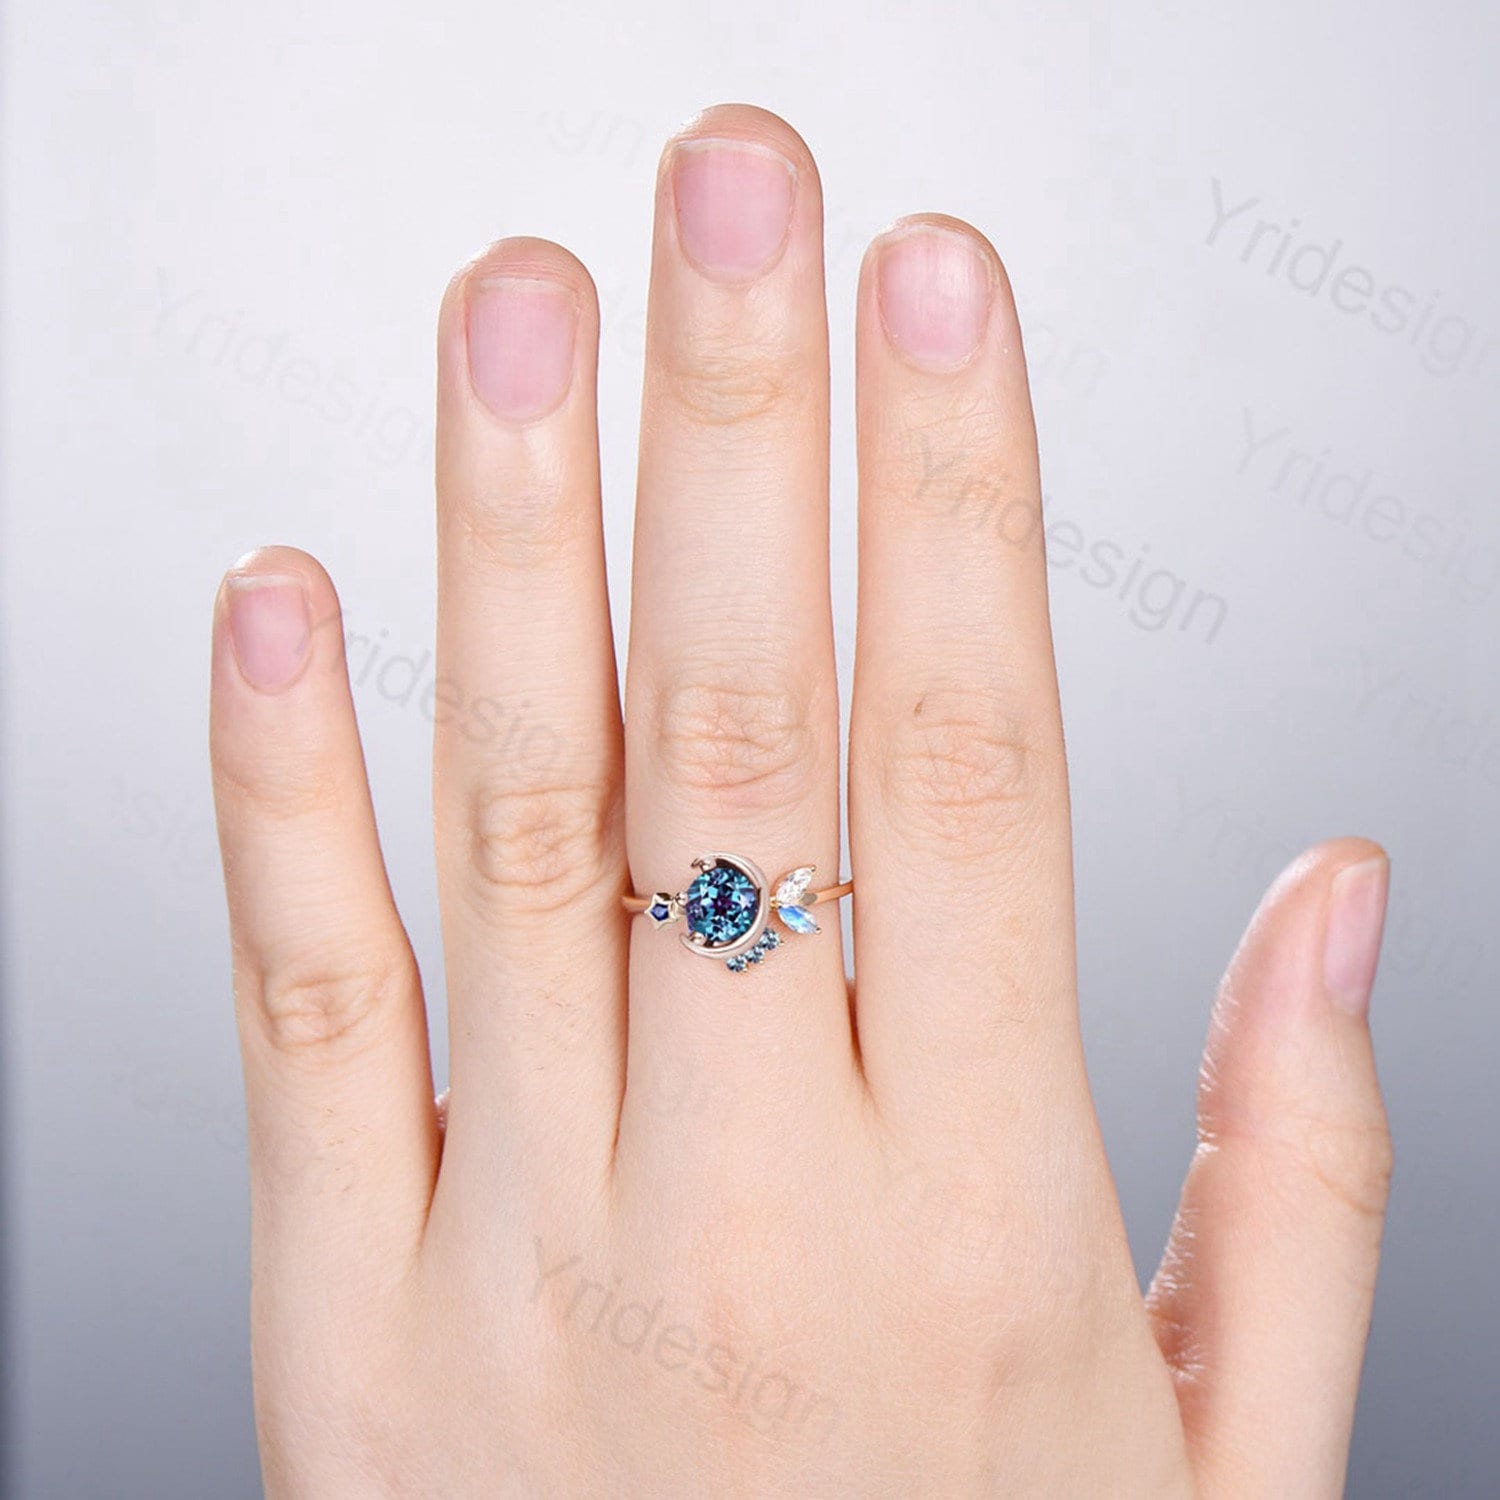 1CT Round Alexandrite Engagement Ring Sapphire Moonstone Wedding Ring Rose Gold Moon Engagement Ring Unique Personalized Star Promise Ring - PENFINE